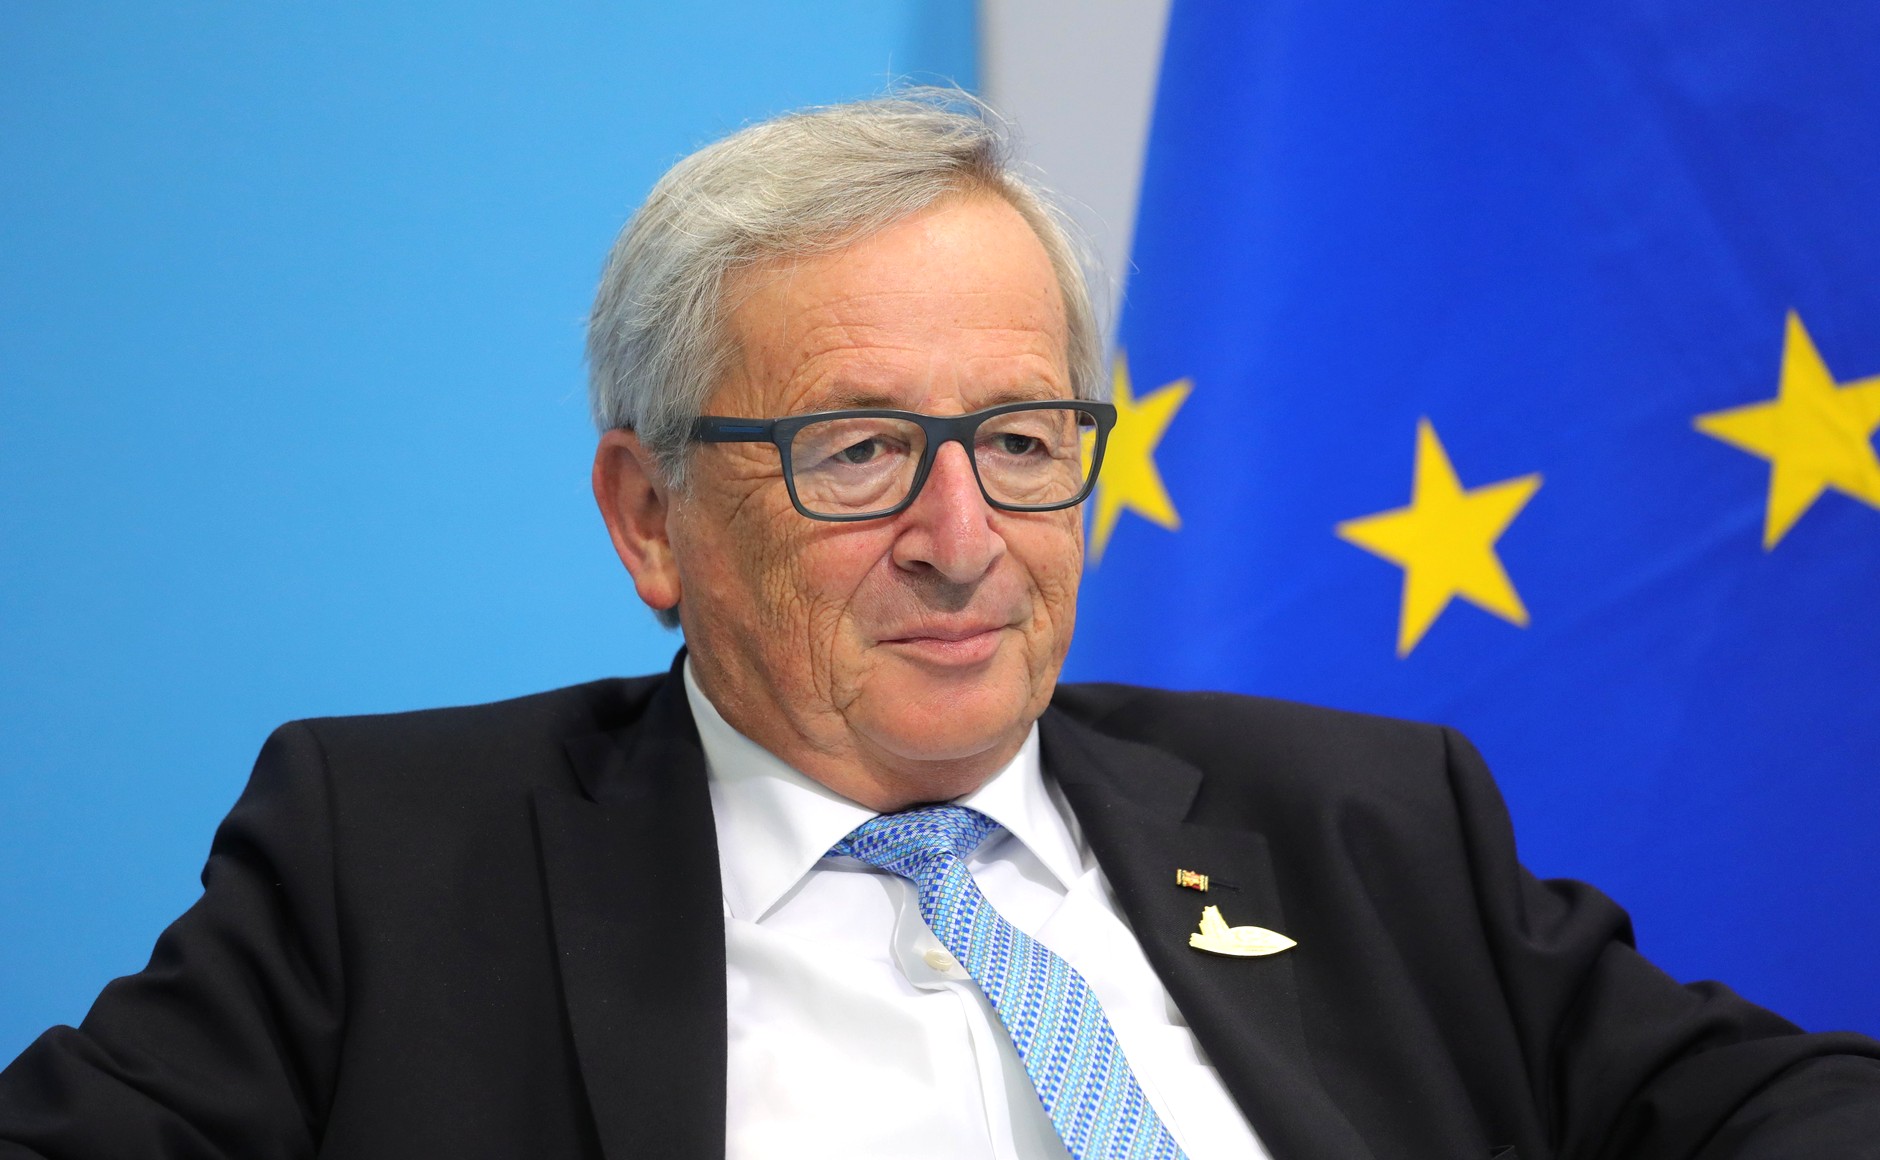 EU Commission chief Juncker calls for reciprocity in trade norms from China